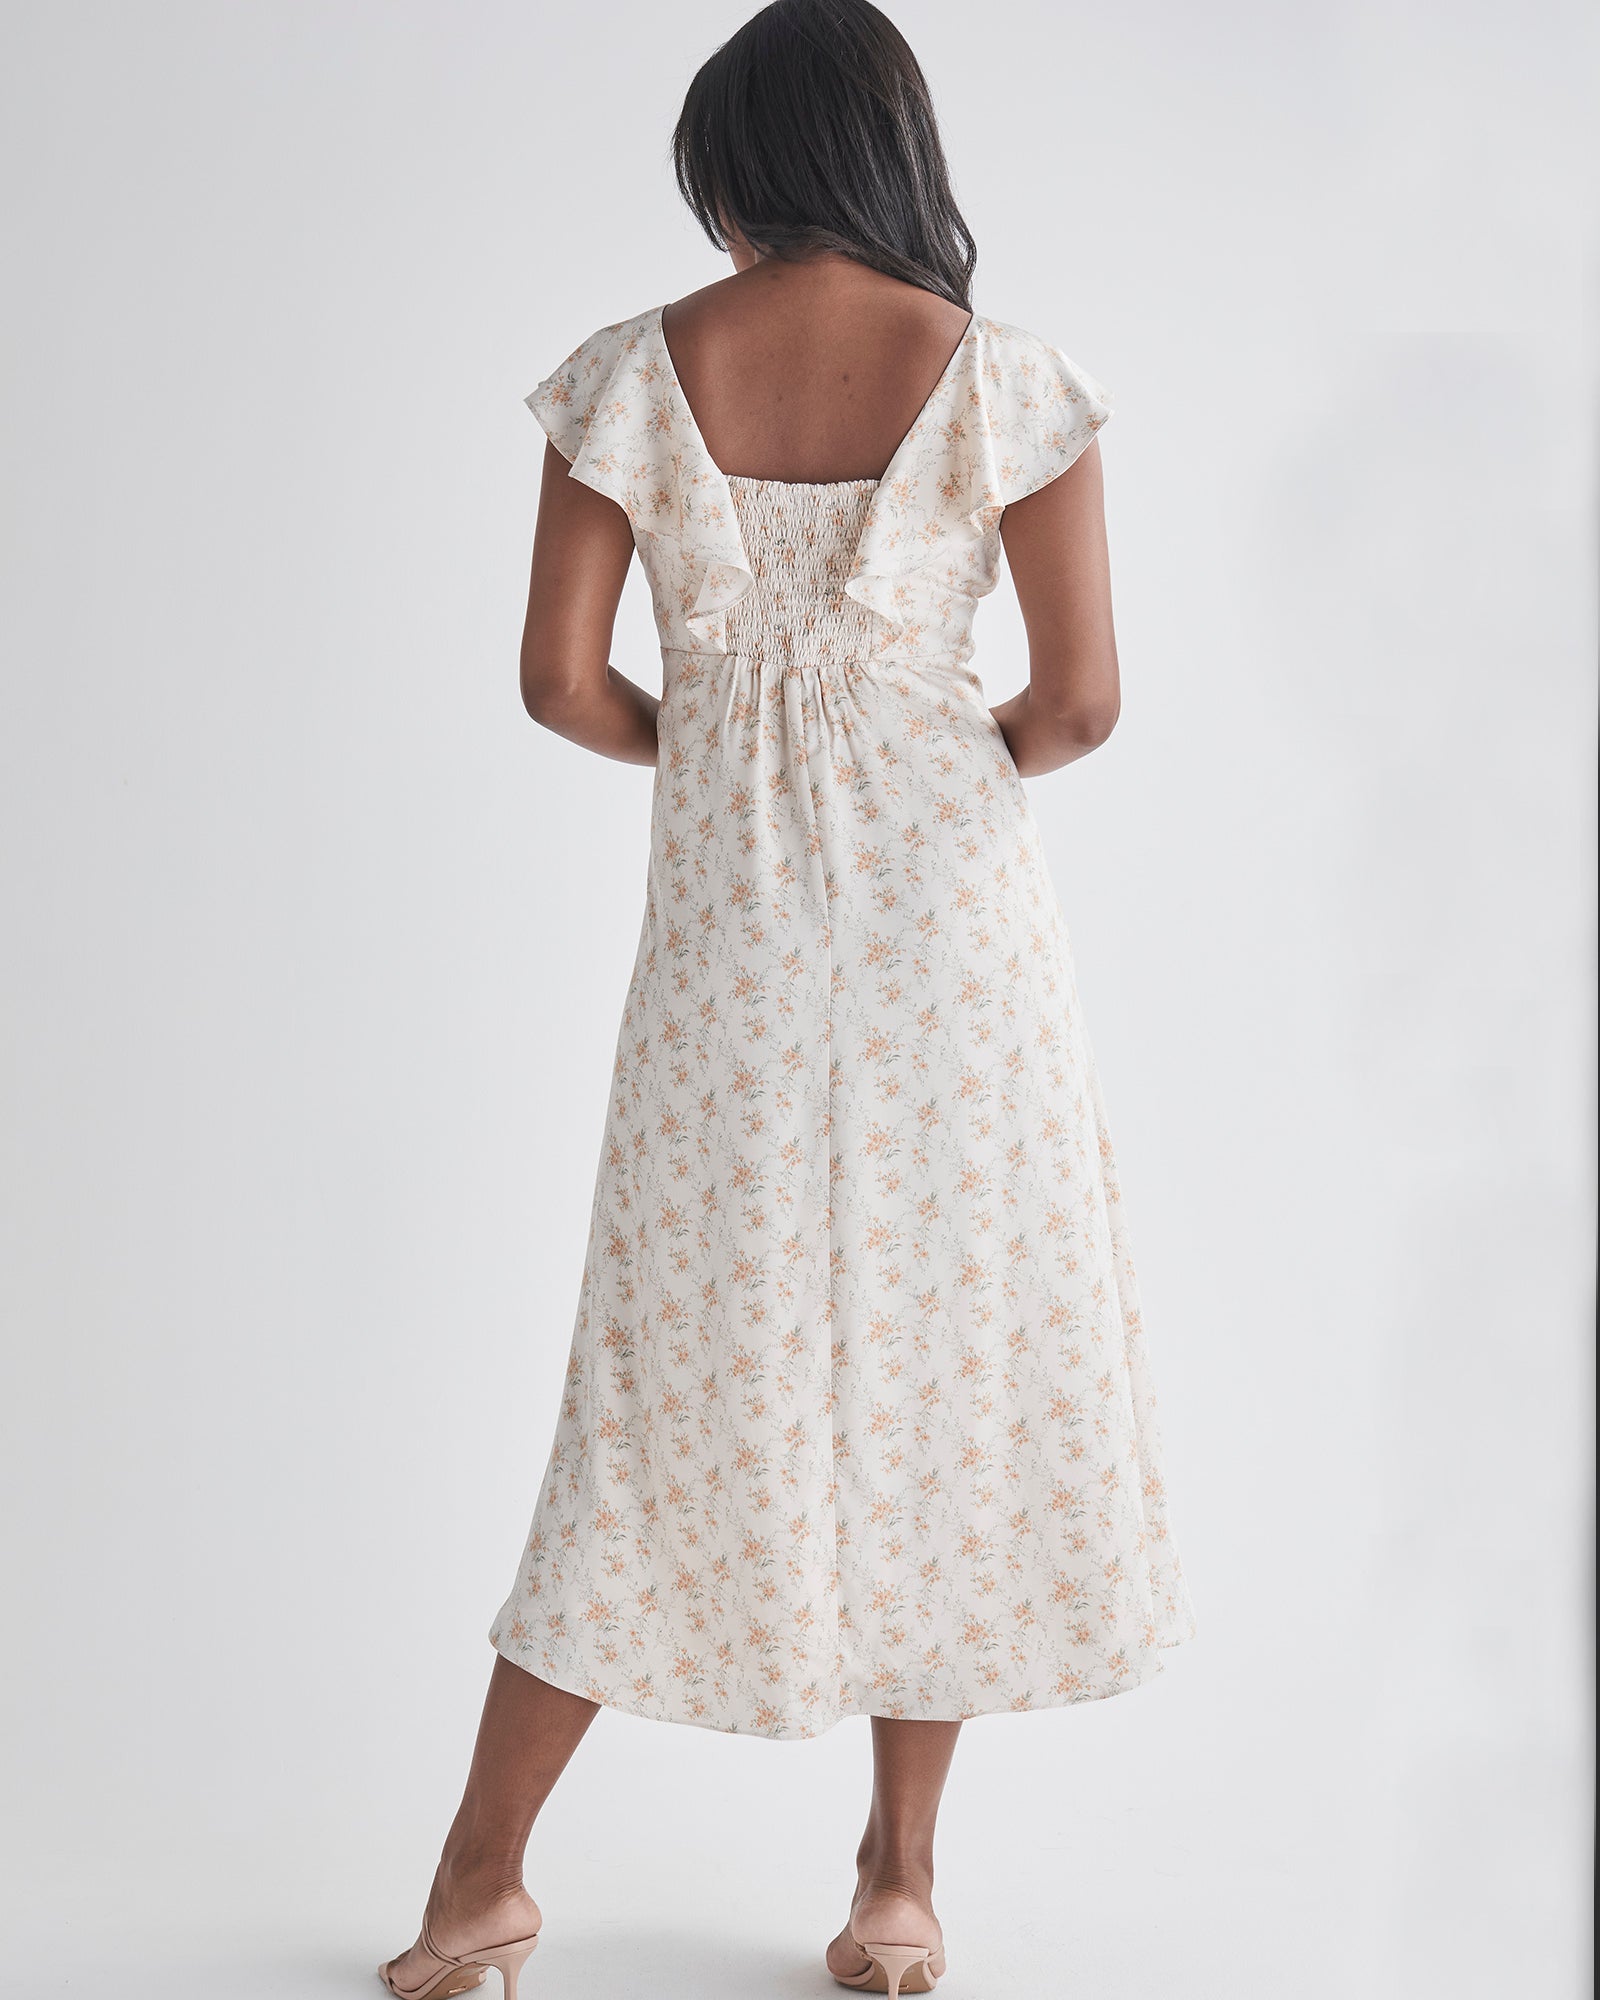 Back view-Delicate ruffle detail at neckline - Smocked, stretch back for comfort - Midi length A-line - Lined top fron Angel Maternity